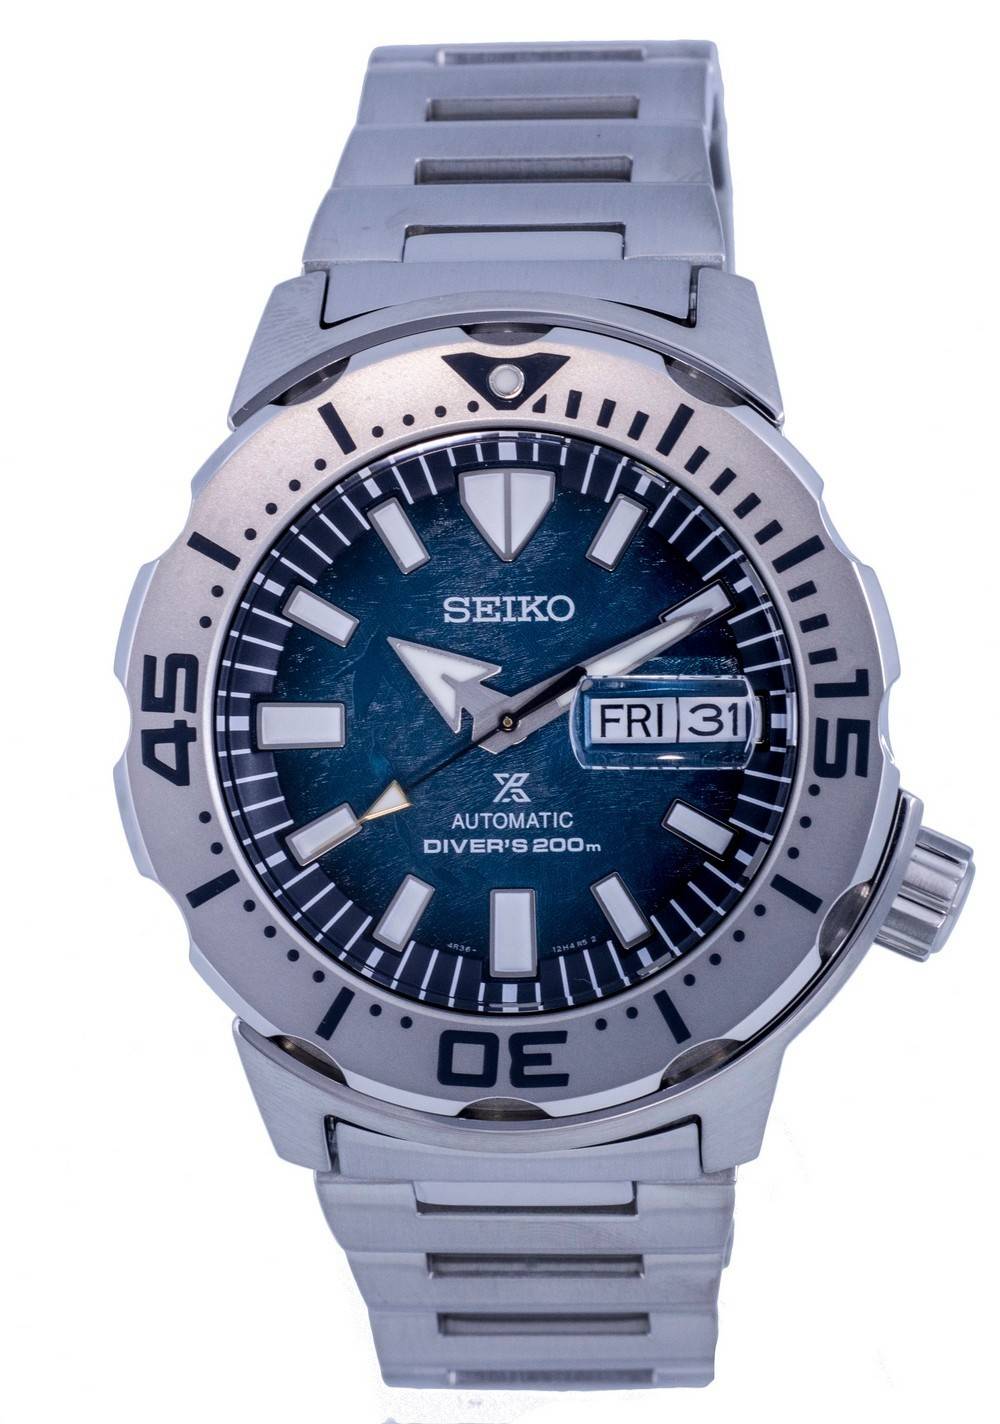 Seiko Prospex Special Edition Diver's Stainless Steel Automatic SRPH75 SRPH75K1 SRPH75K 200M Men's Watch